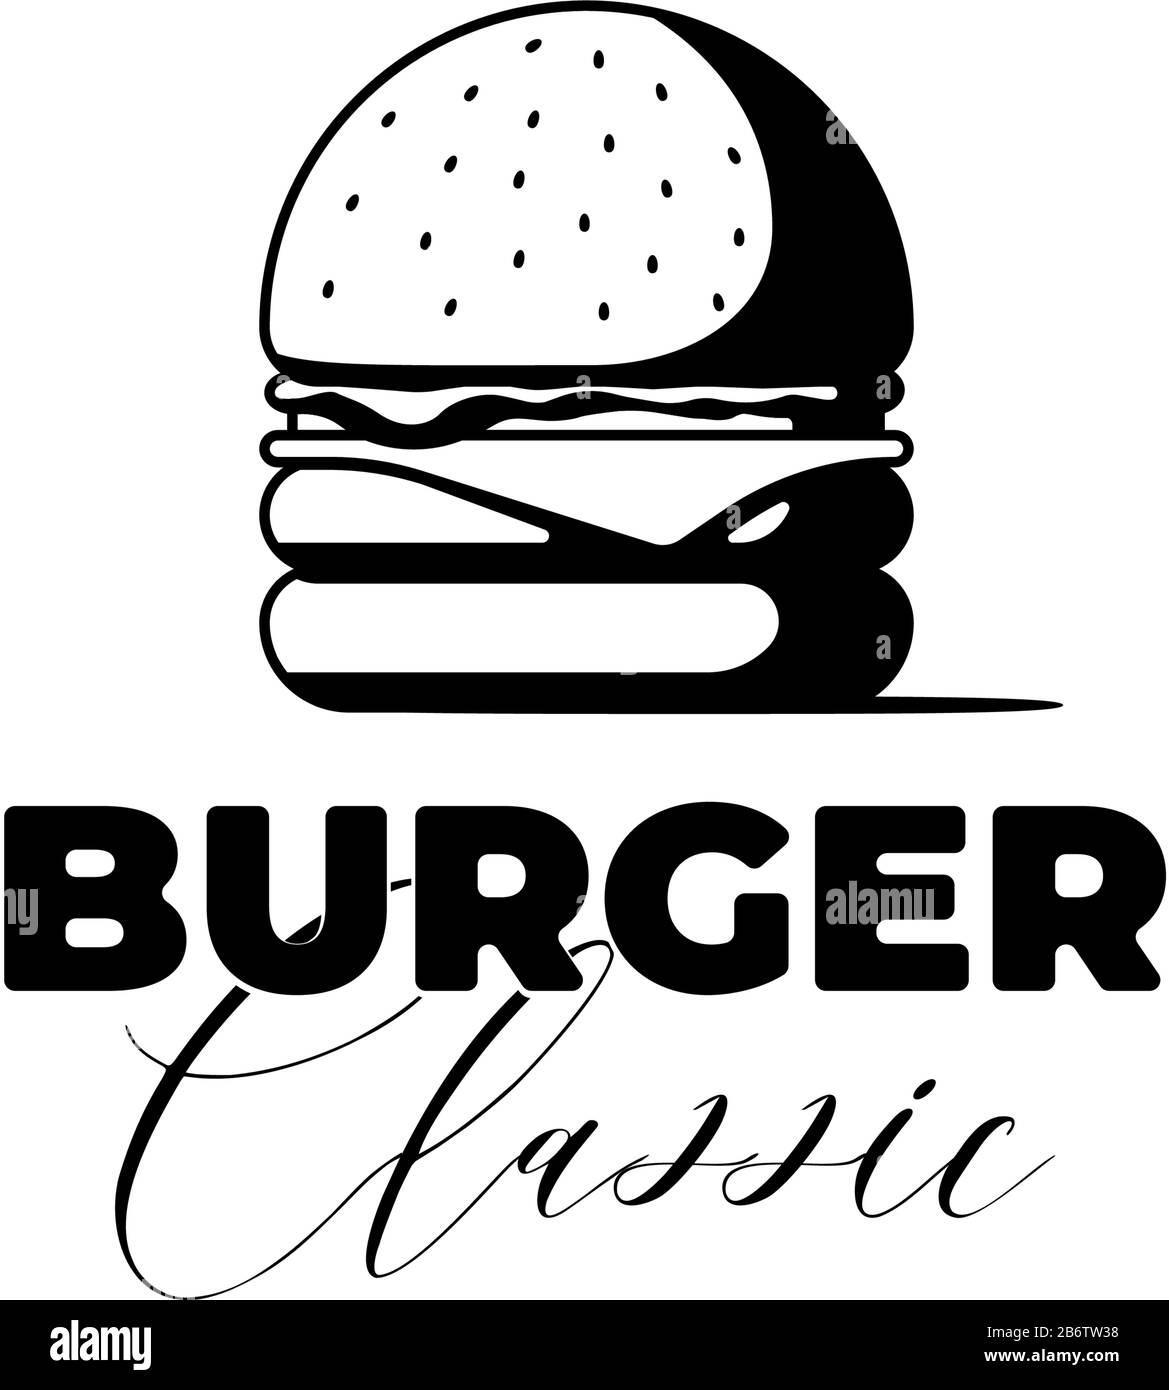 Classic burger fast food meal advertising banner with lettering inscription. Delicious hamburger or cheeseburger vintage promotional design template. Vector black illustration for restaurant menu Stock Vector